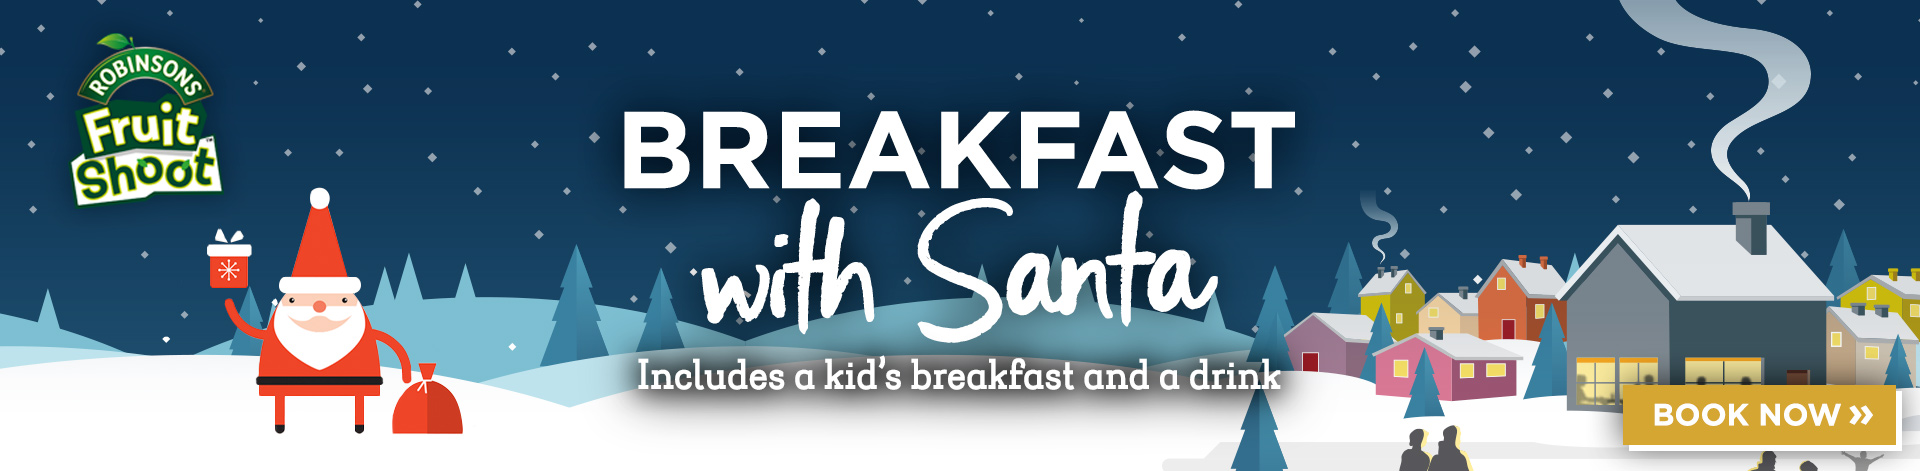 Breakfast with Santa menu at Leven Valley